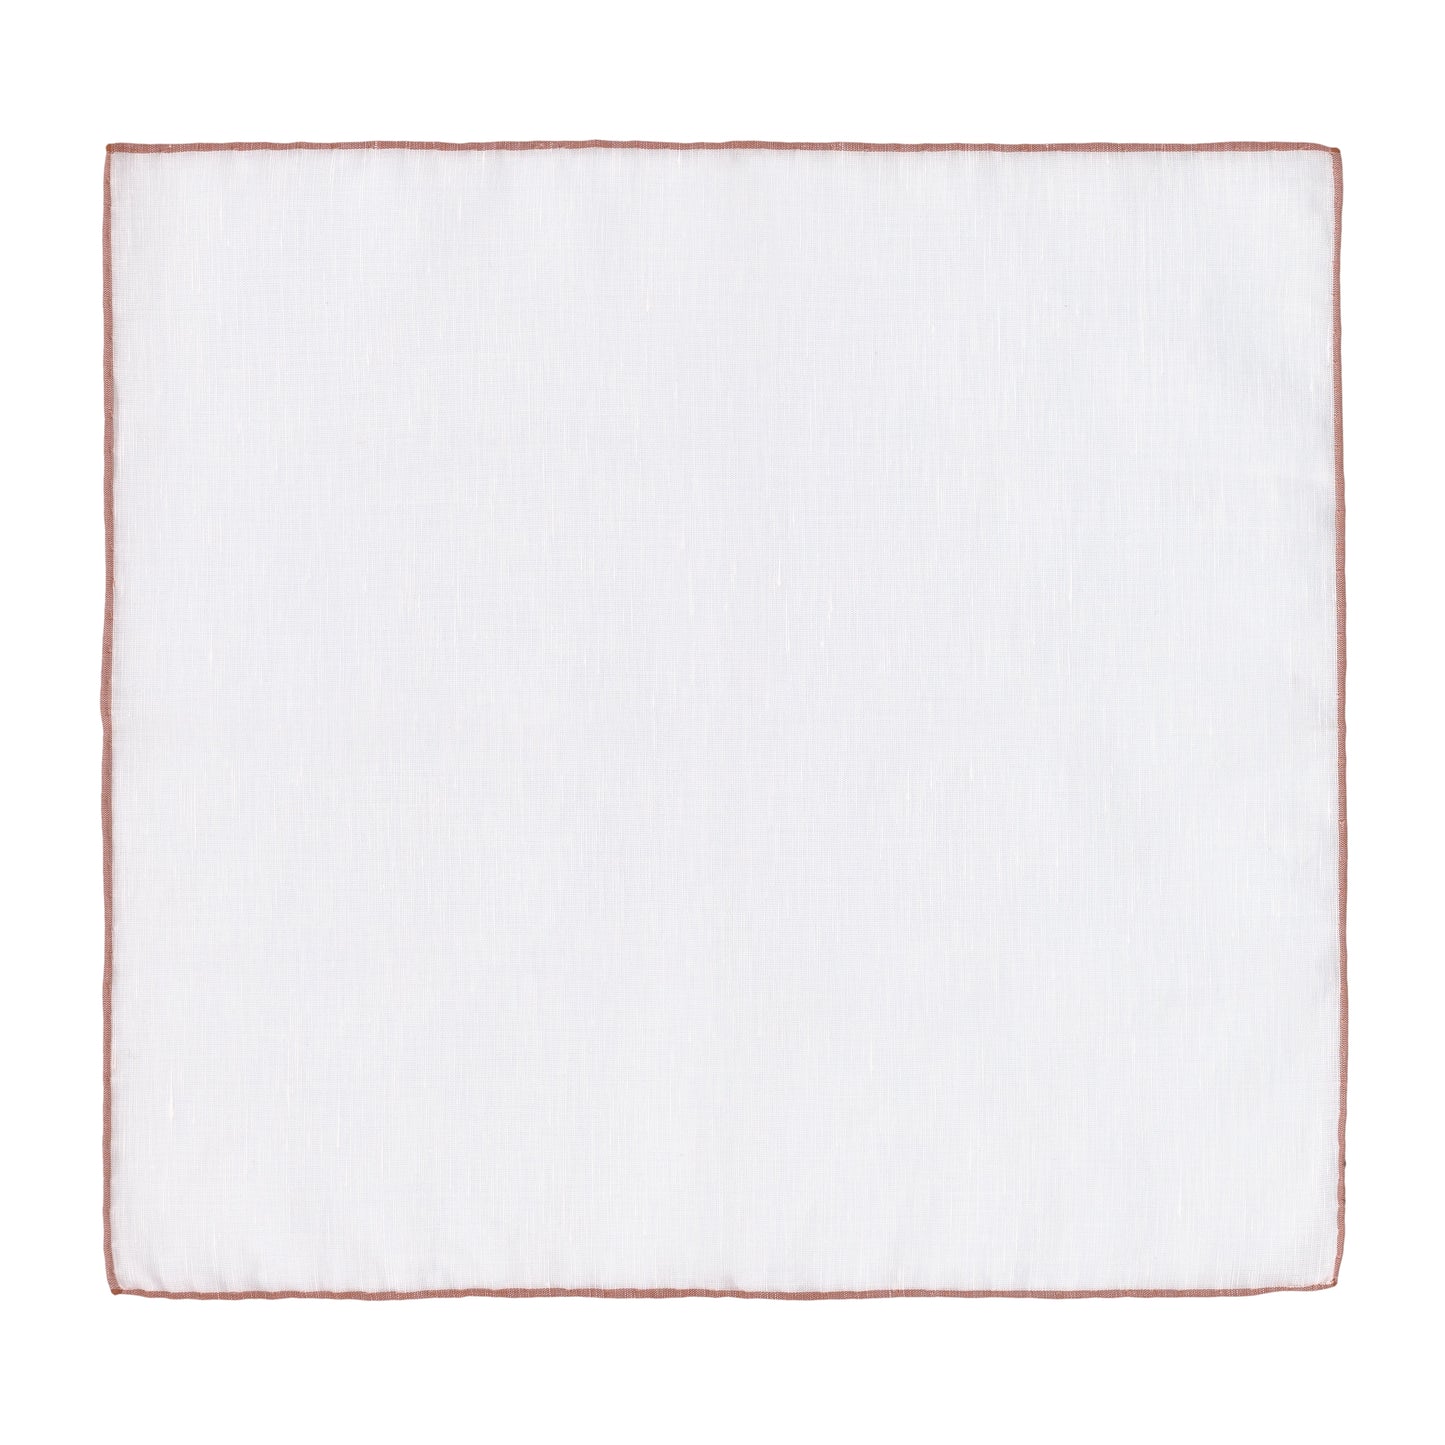 Cotton Blend Pocket Square in White and Caramel